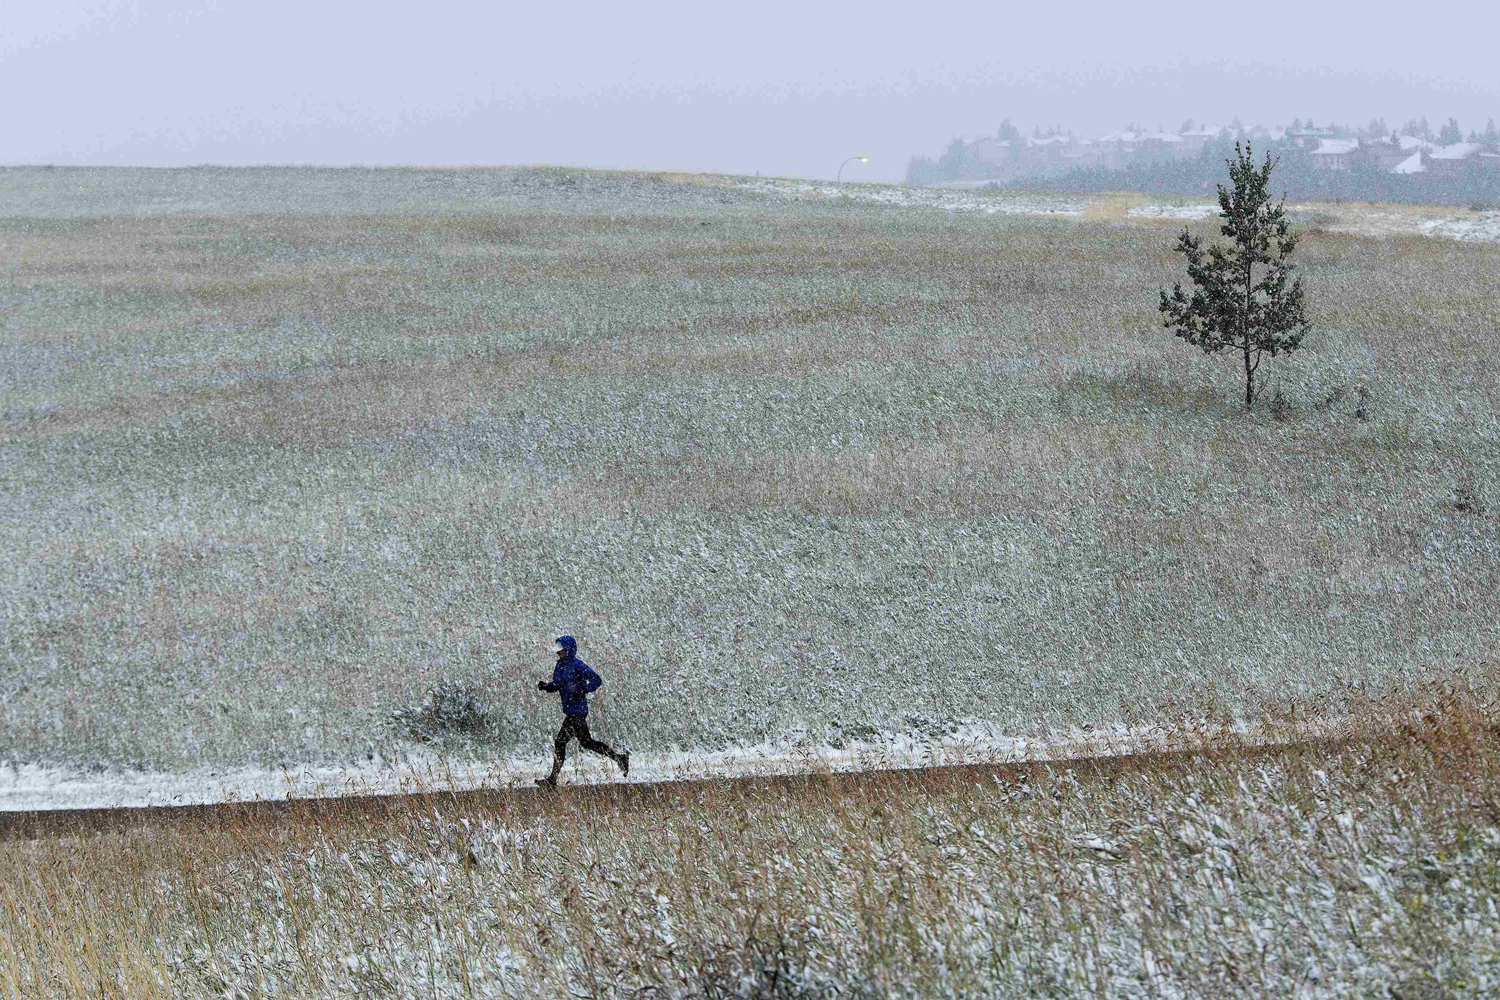 Sept. 8, 2014. A jogger runs through the snow at Nose Hill Park during an early year snow fall in Calgary, Alberta. The snow and unseasonably cold weather are supposed to last for two days, according to local media reports.